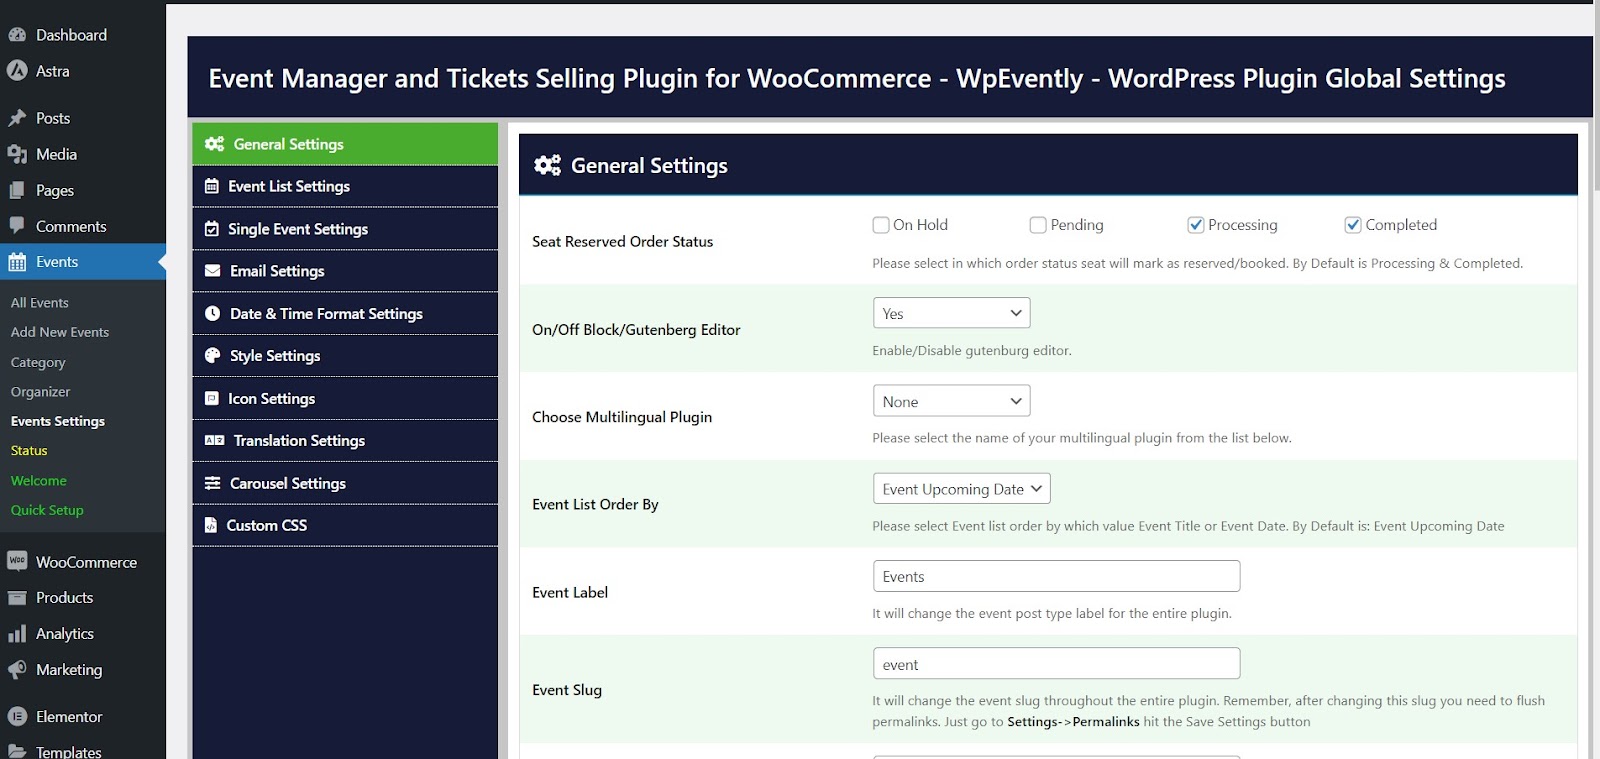 How to Use WooCommerce for Event Registration 352